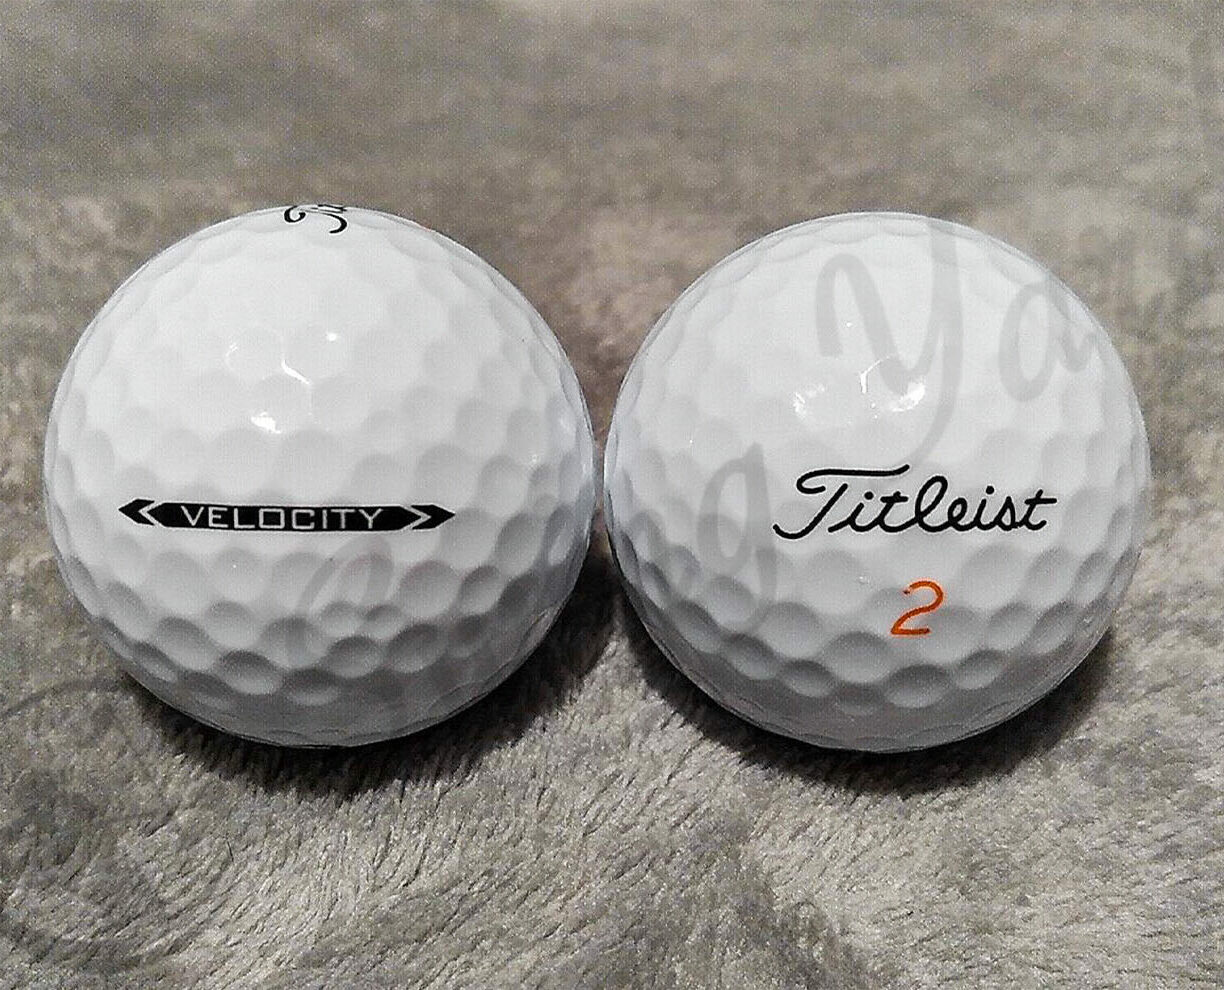 A side and front view of Titleist Velocity golf balls in my living room